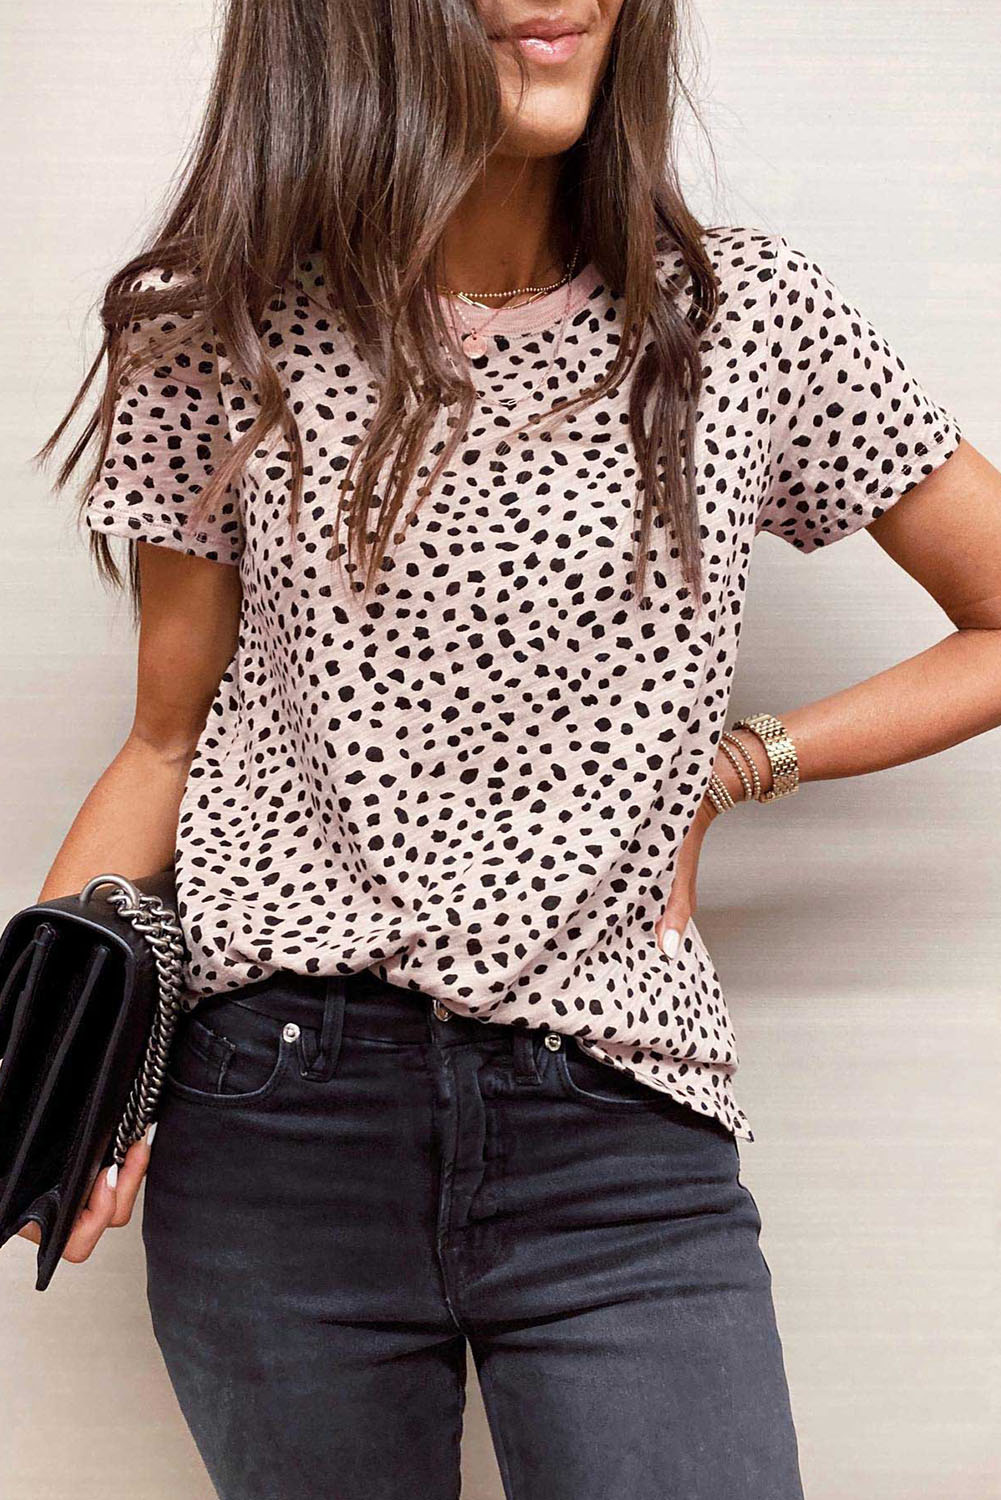 Shewin Wholesale Clothes Suppliers Apricot Cheetah Print Casual Crew Neck T SHIRT